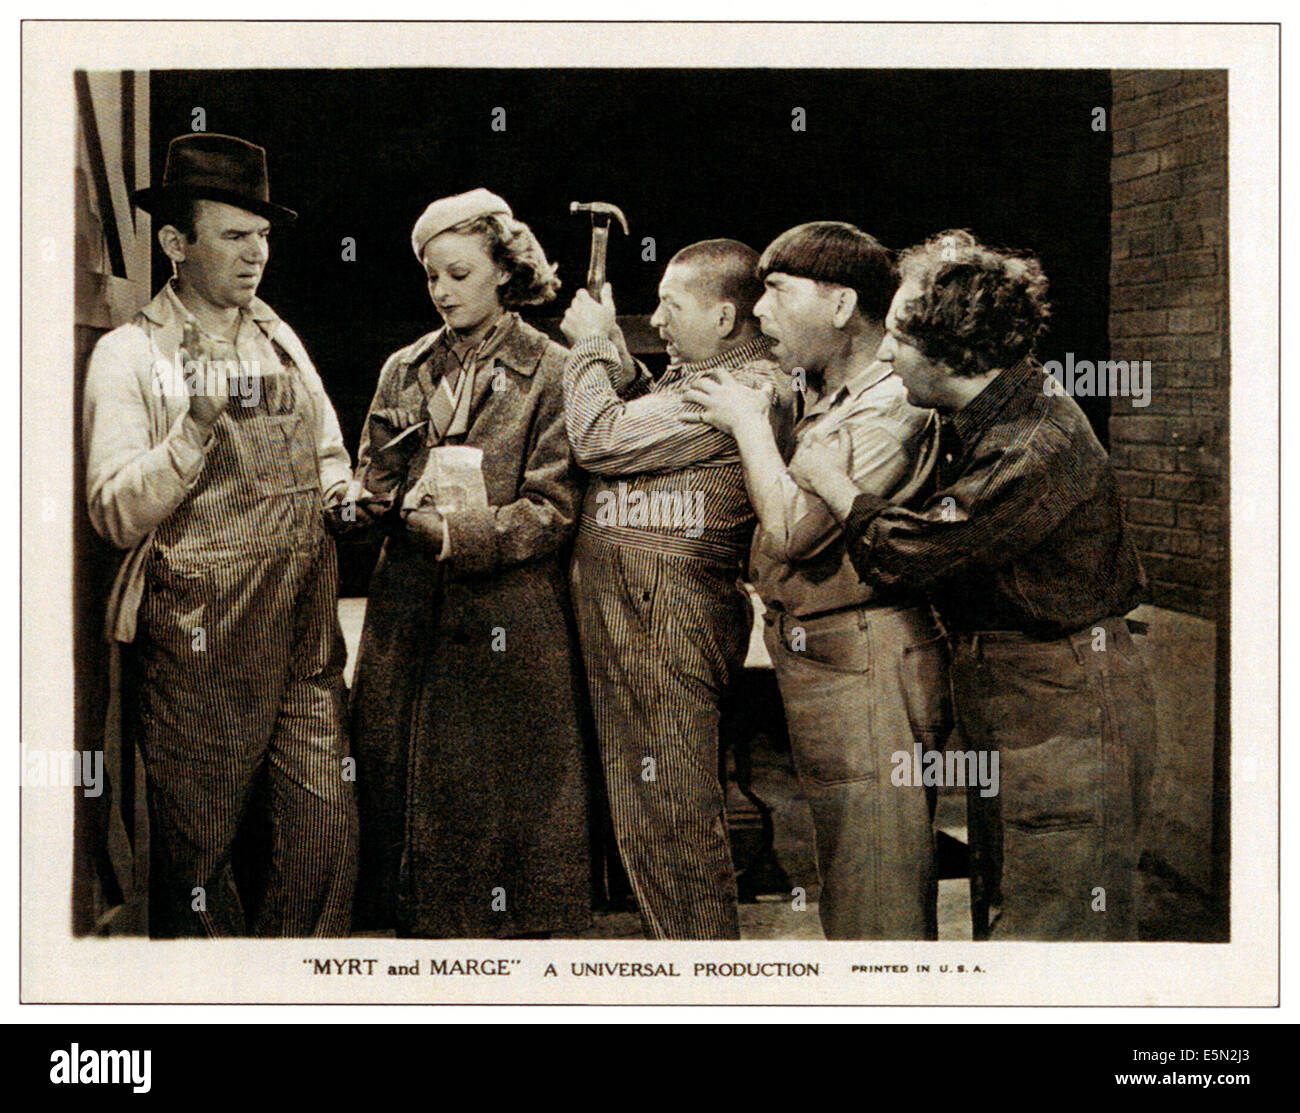 MYRT AN DMARGE, from left: Ted Healy, Three Stooges-Curly Howard, Moe Howard, Larry Fine, 1933. Stock Photo